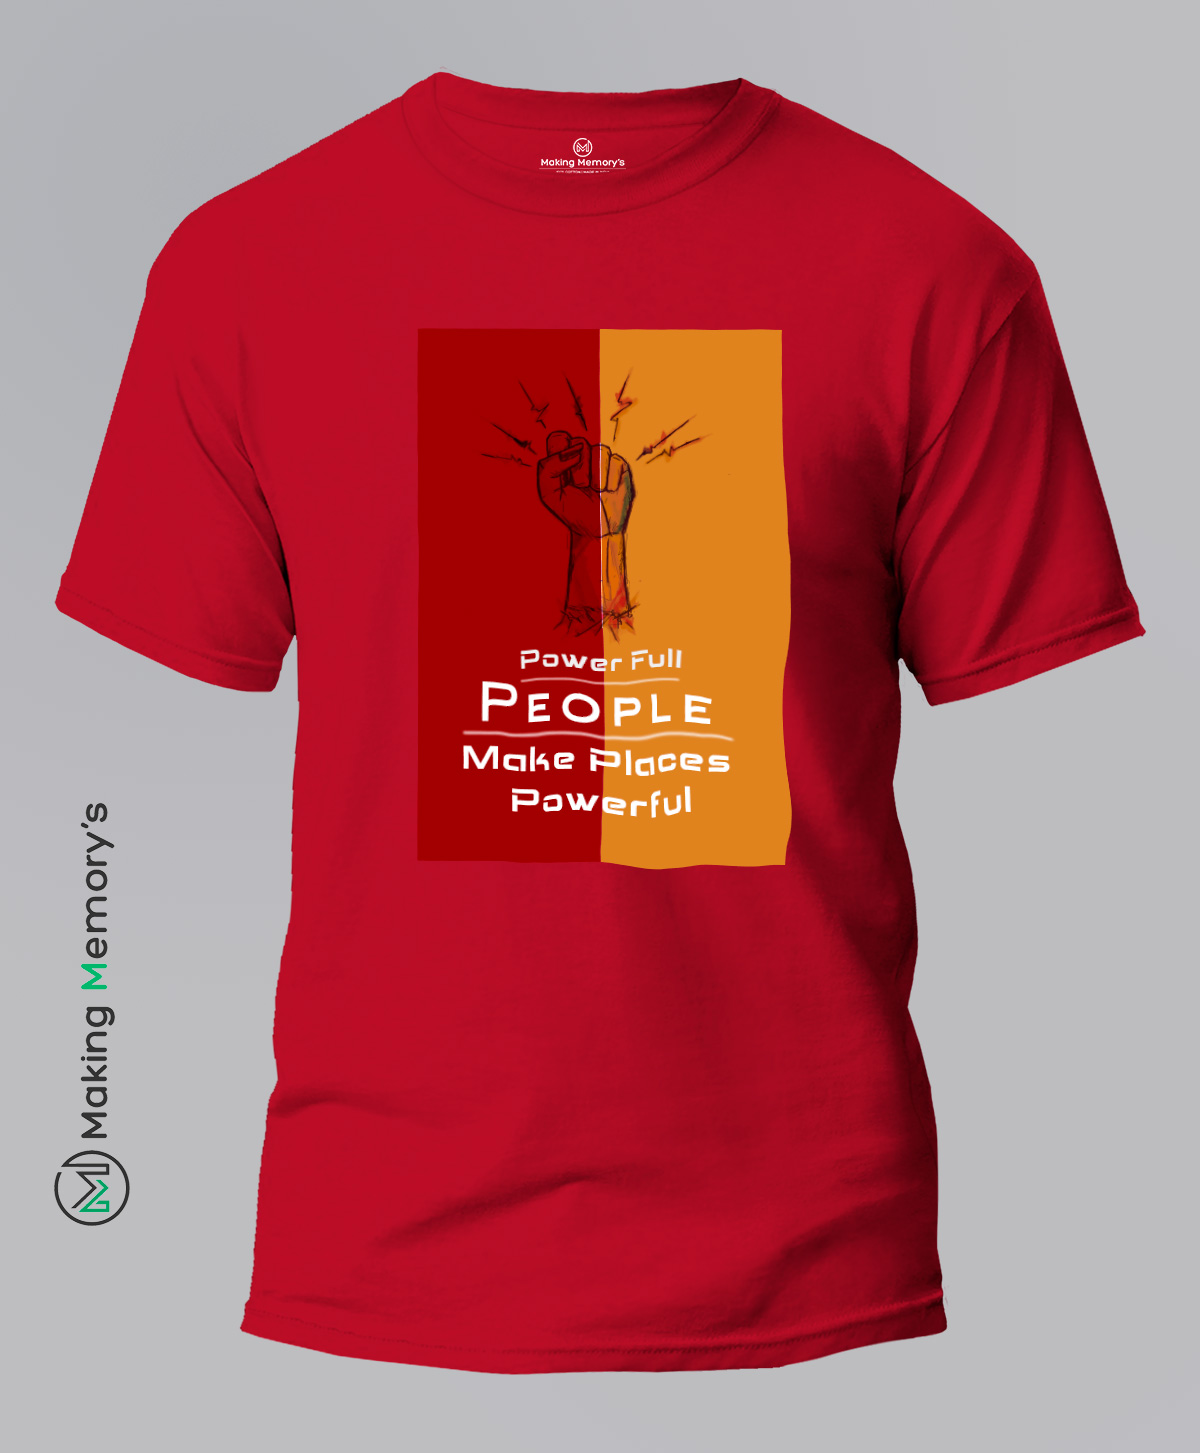 Power-Full-People-Make-Places-Powerful-Red-T-Shirt